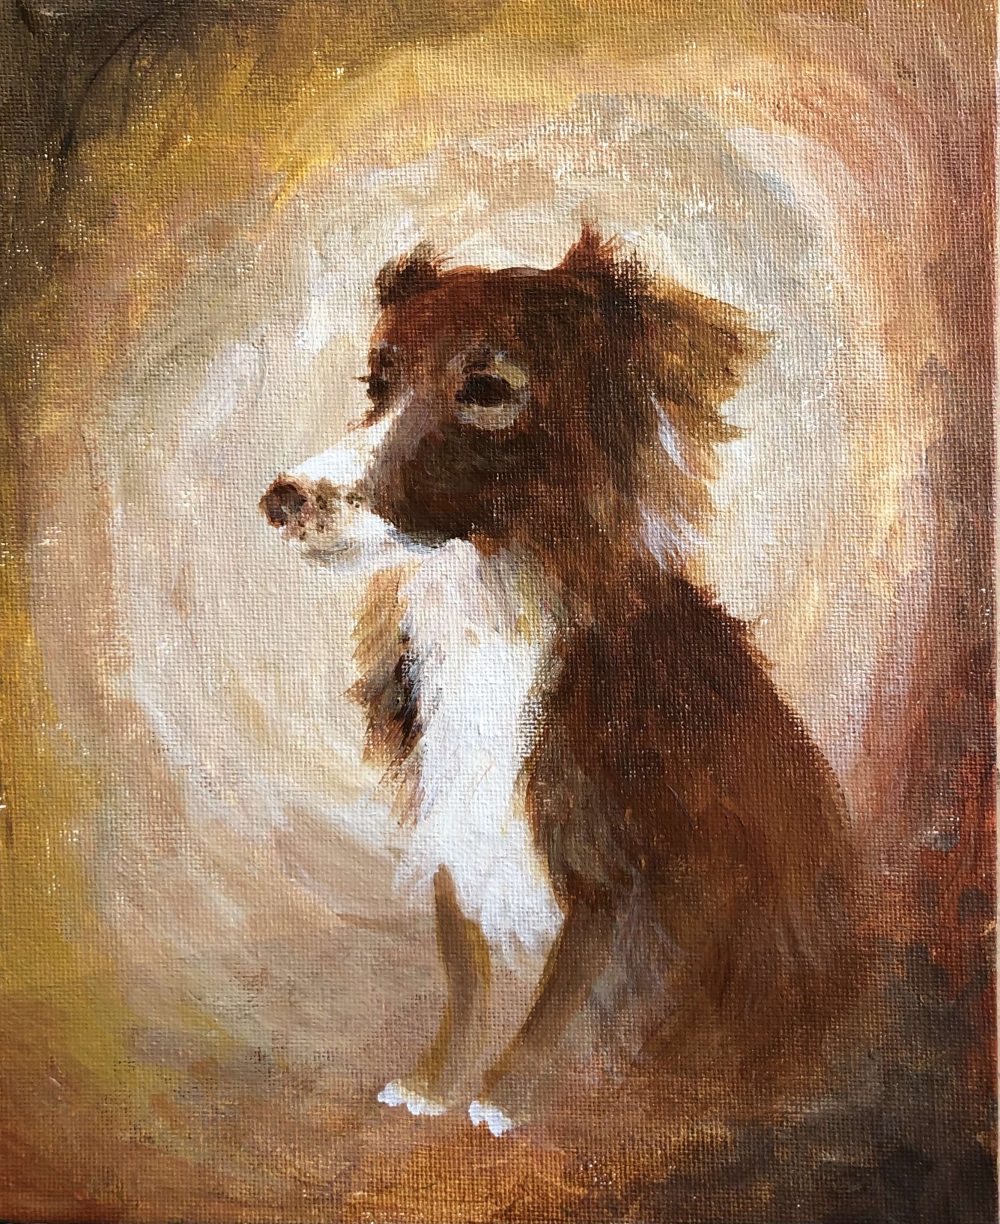 Portrait of a brown dog with a white chest.